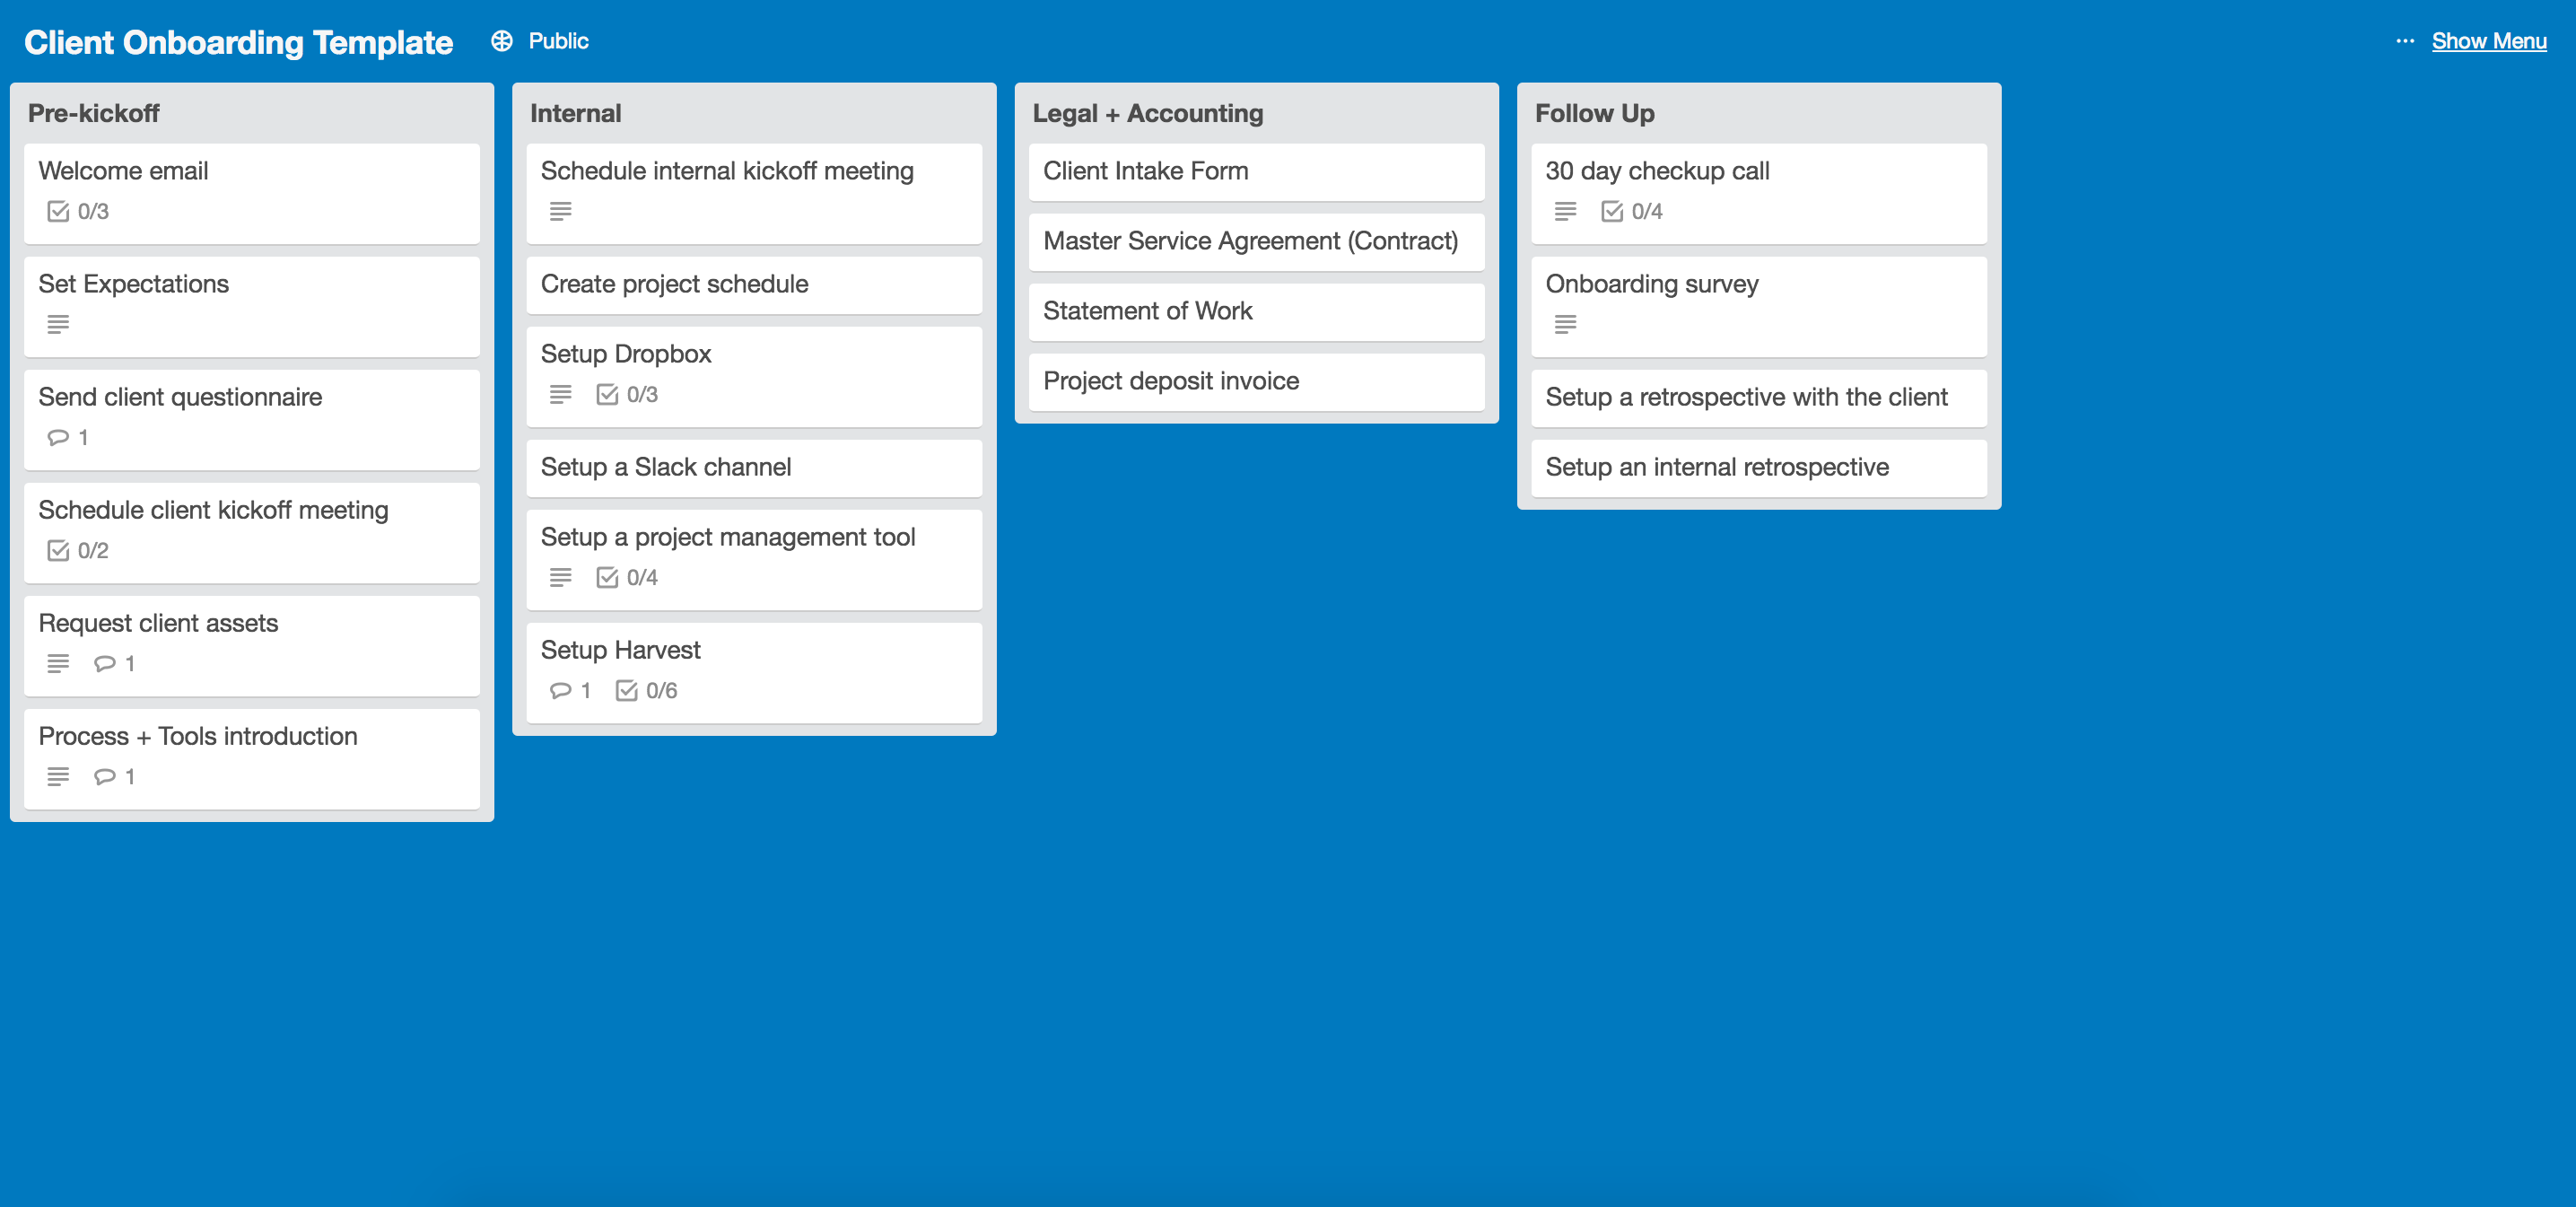 client onboarding template trello